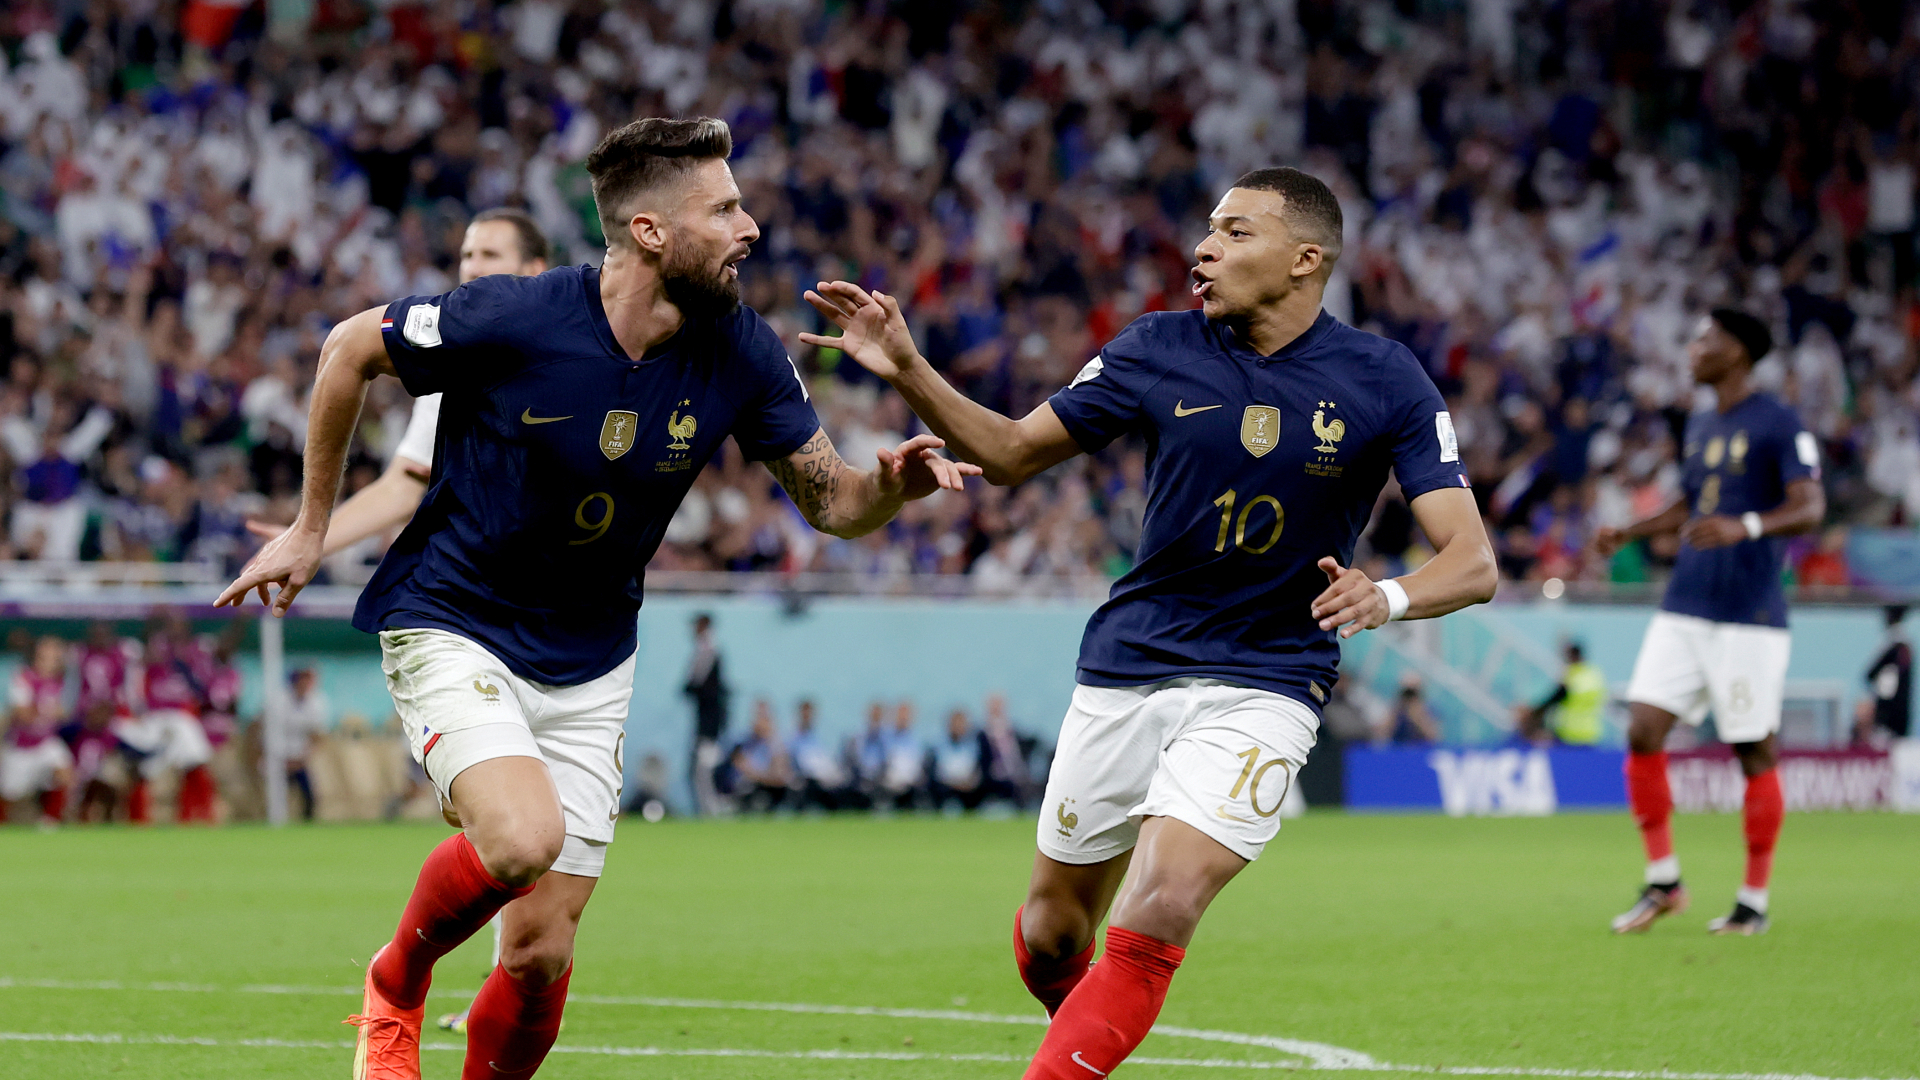 Giroud makes history as France surges into quarters